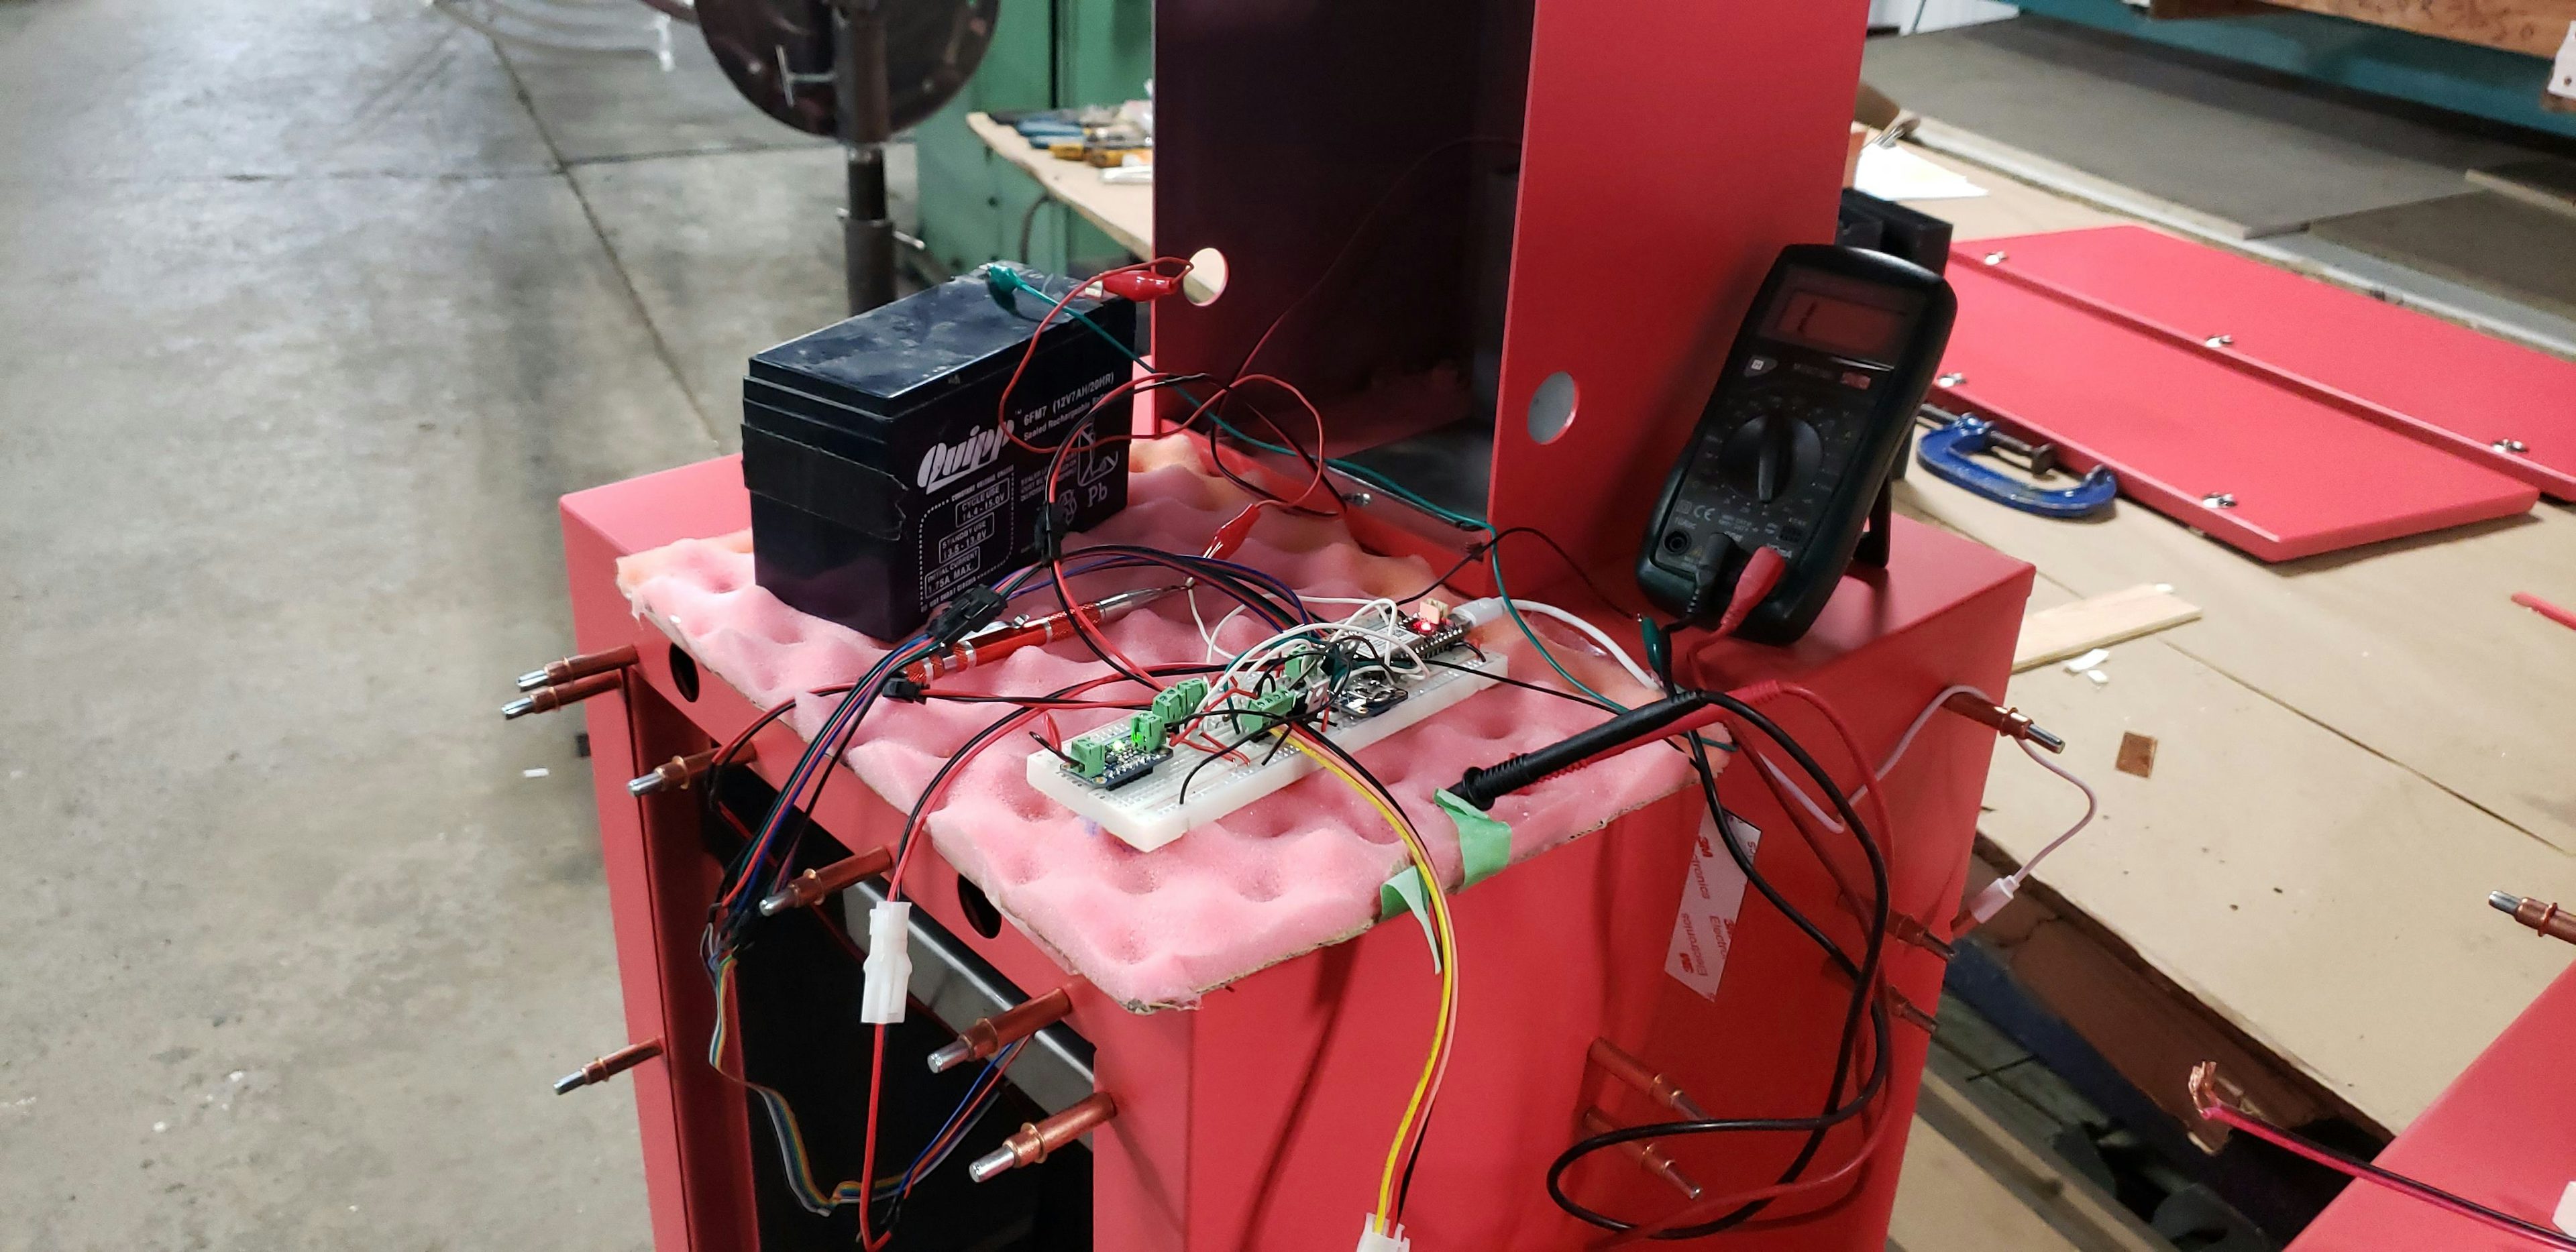 An SLA battery and circuits sit on top of a red newspaper box in a fabrication studio